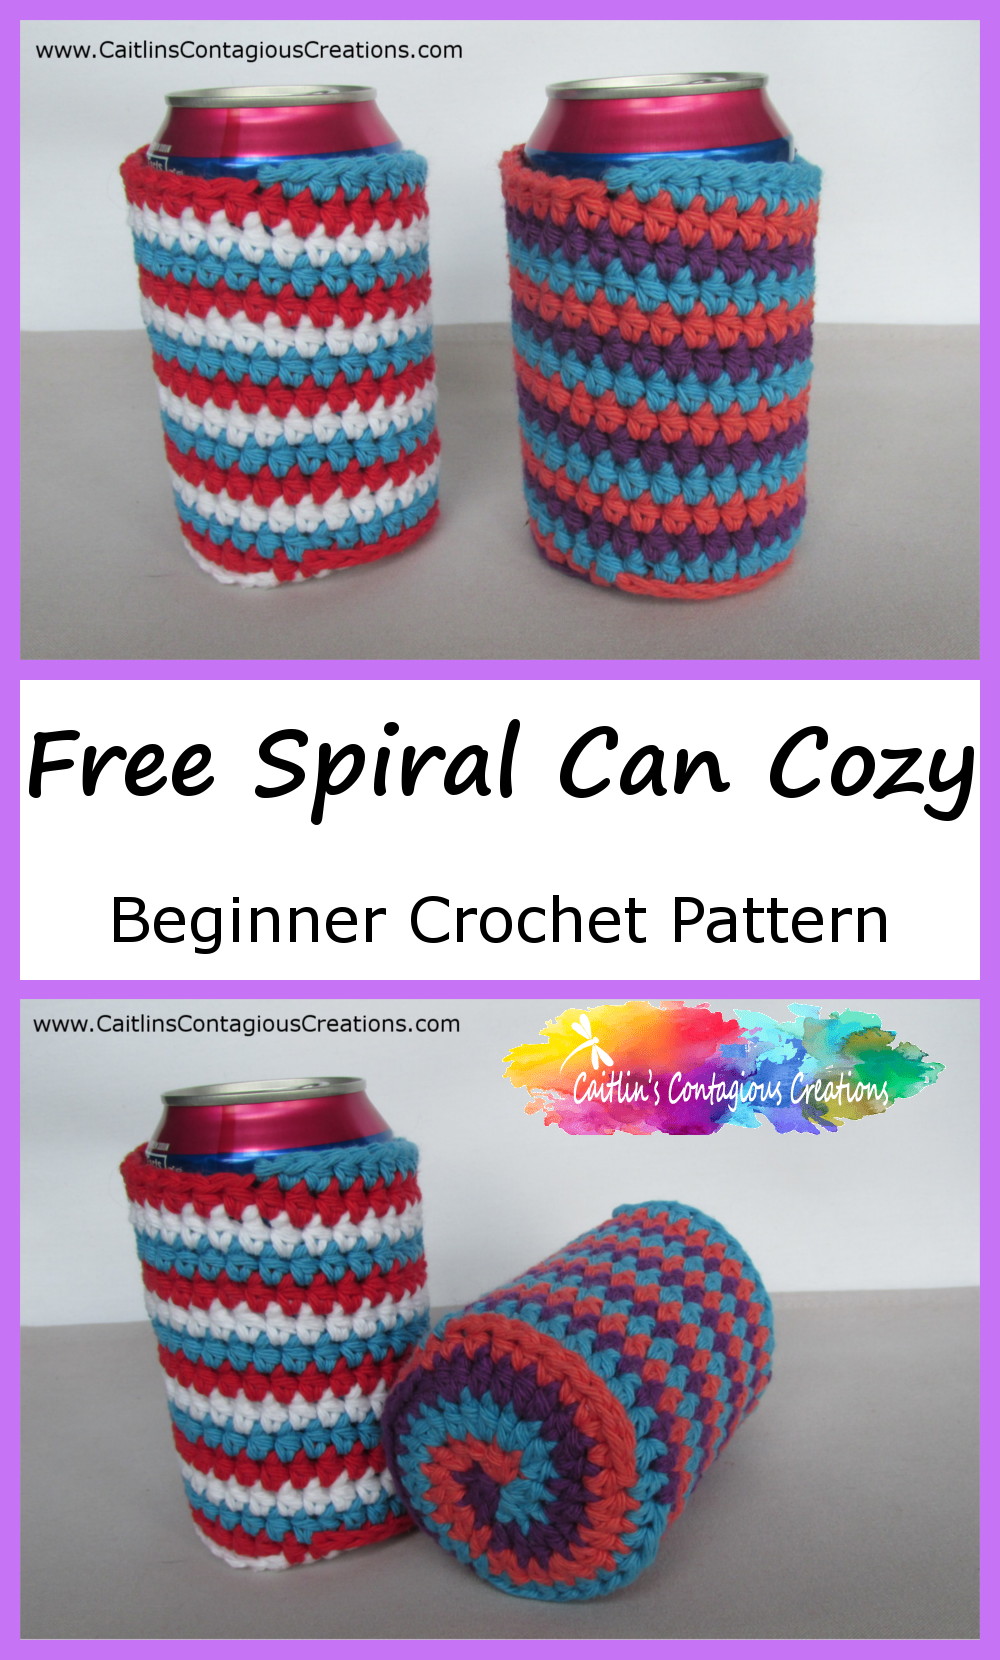 two photos of finished can cozies showing striped sides and spiral bottom showing with text overlay "Free spiral can cozy beginner crochet pattern"